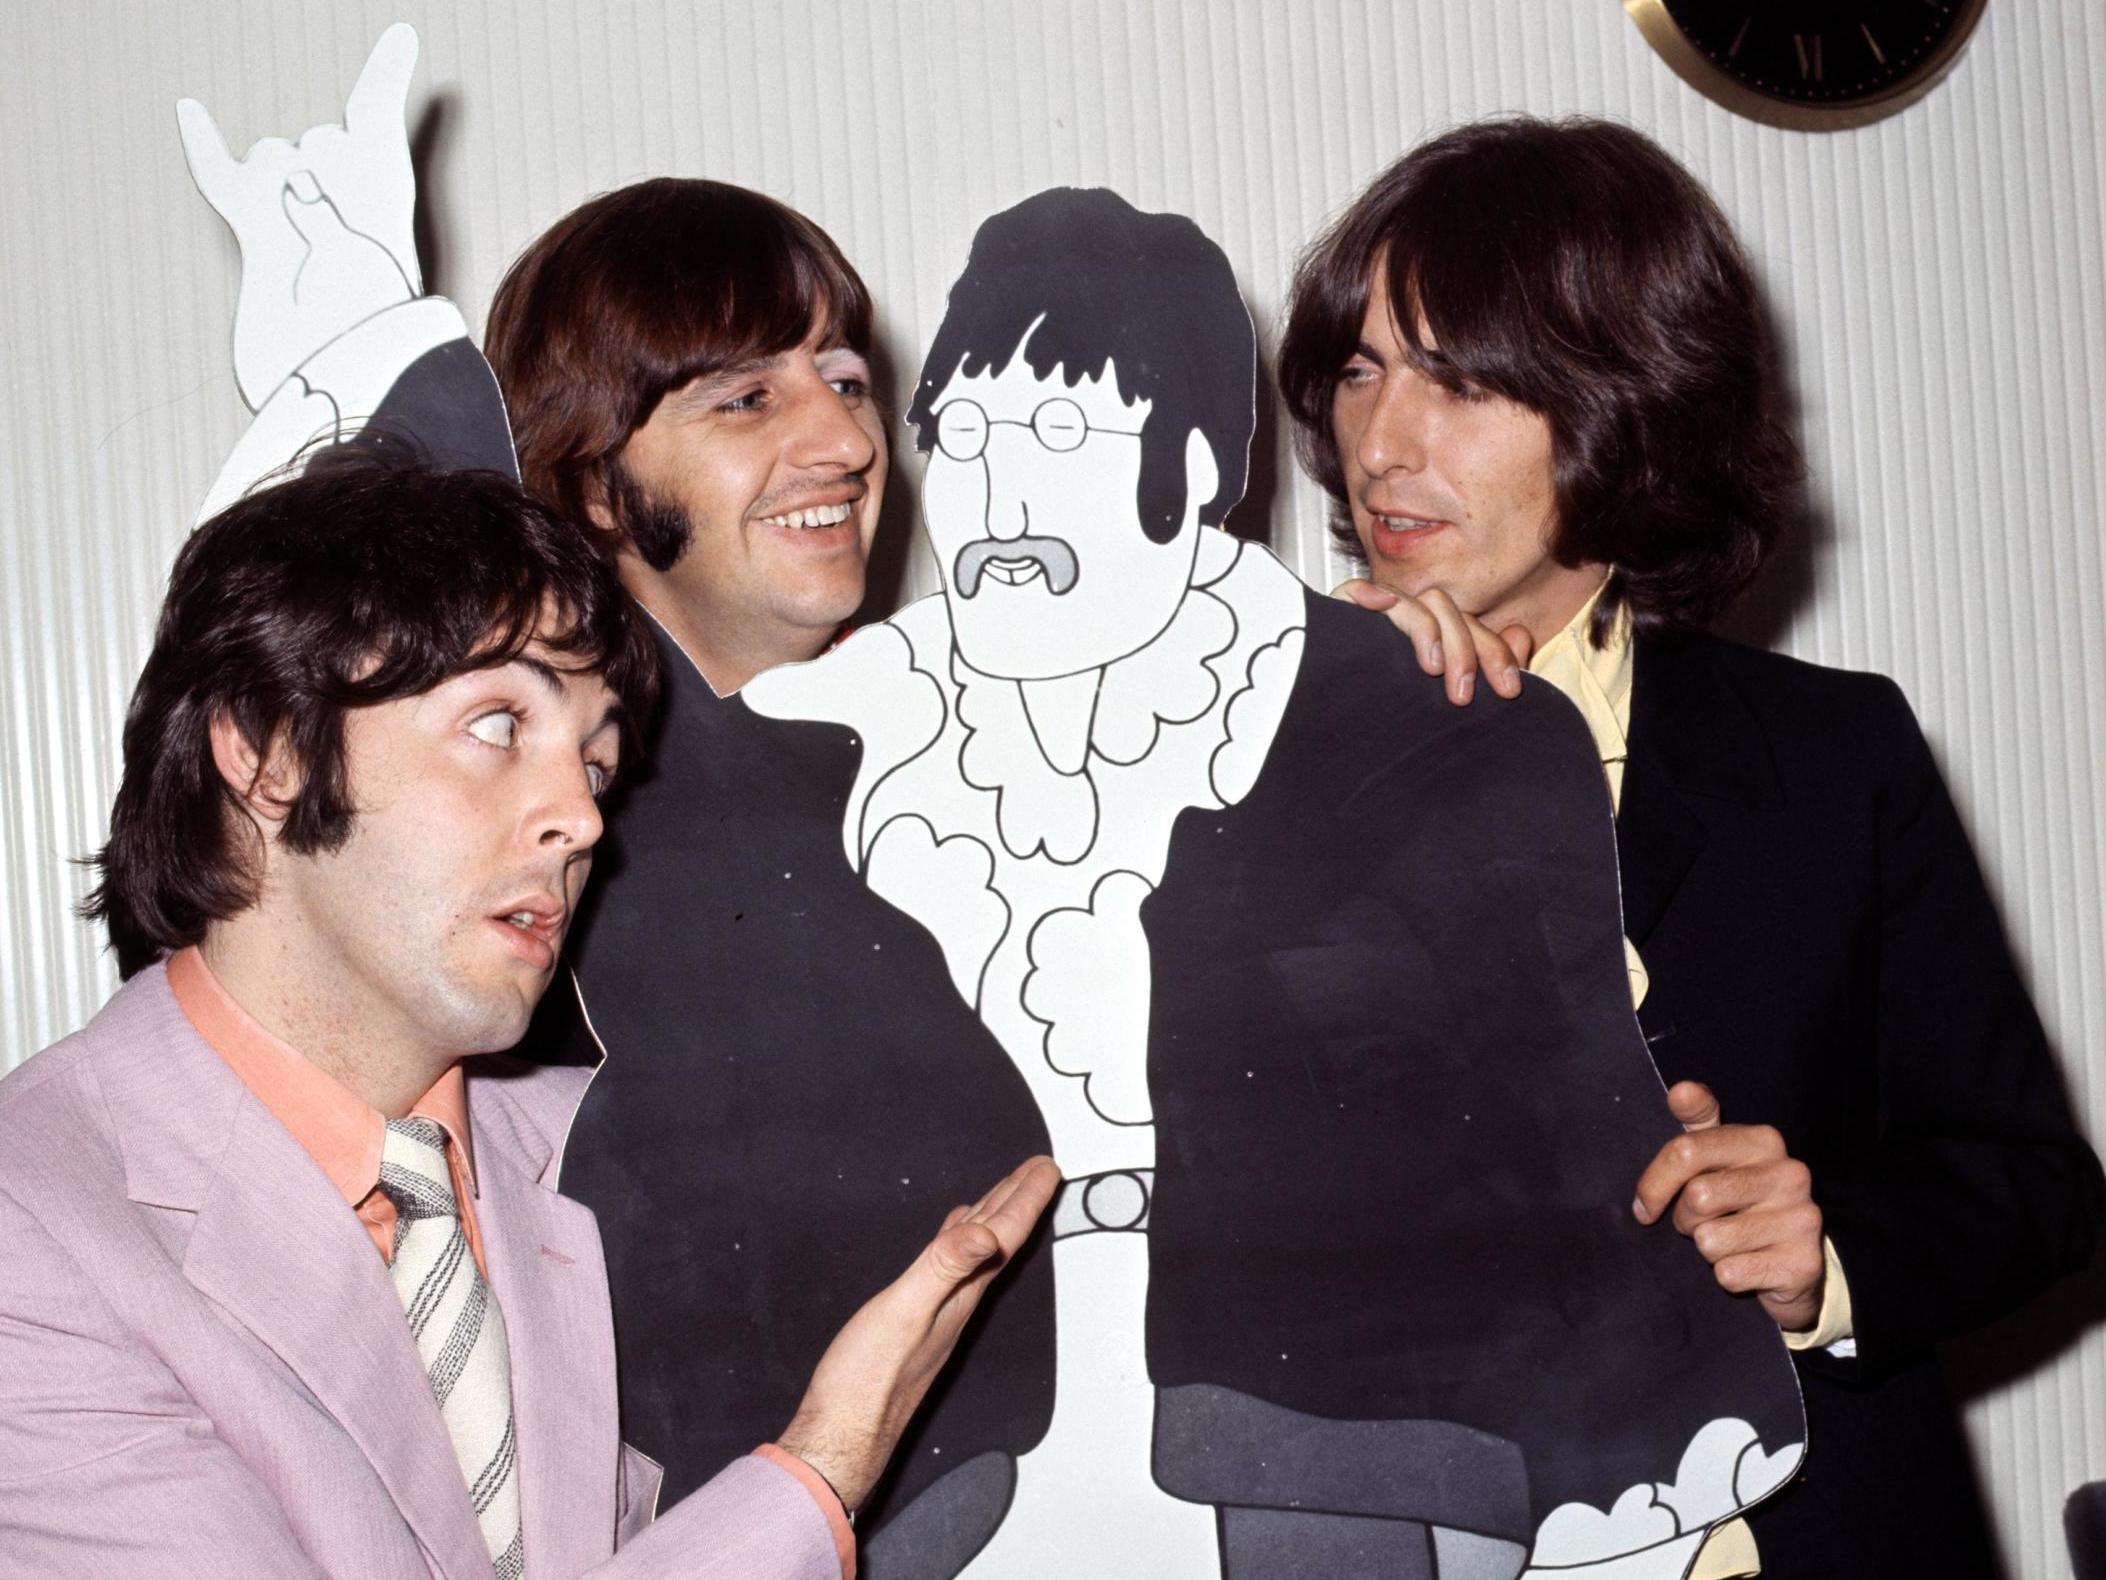 Paul McCartney, Ringo Starr and George Harrison pose with a cardboard John Lennon cut out in his absence in 1968